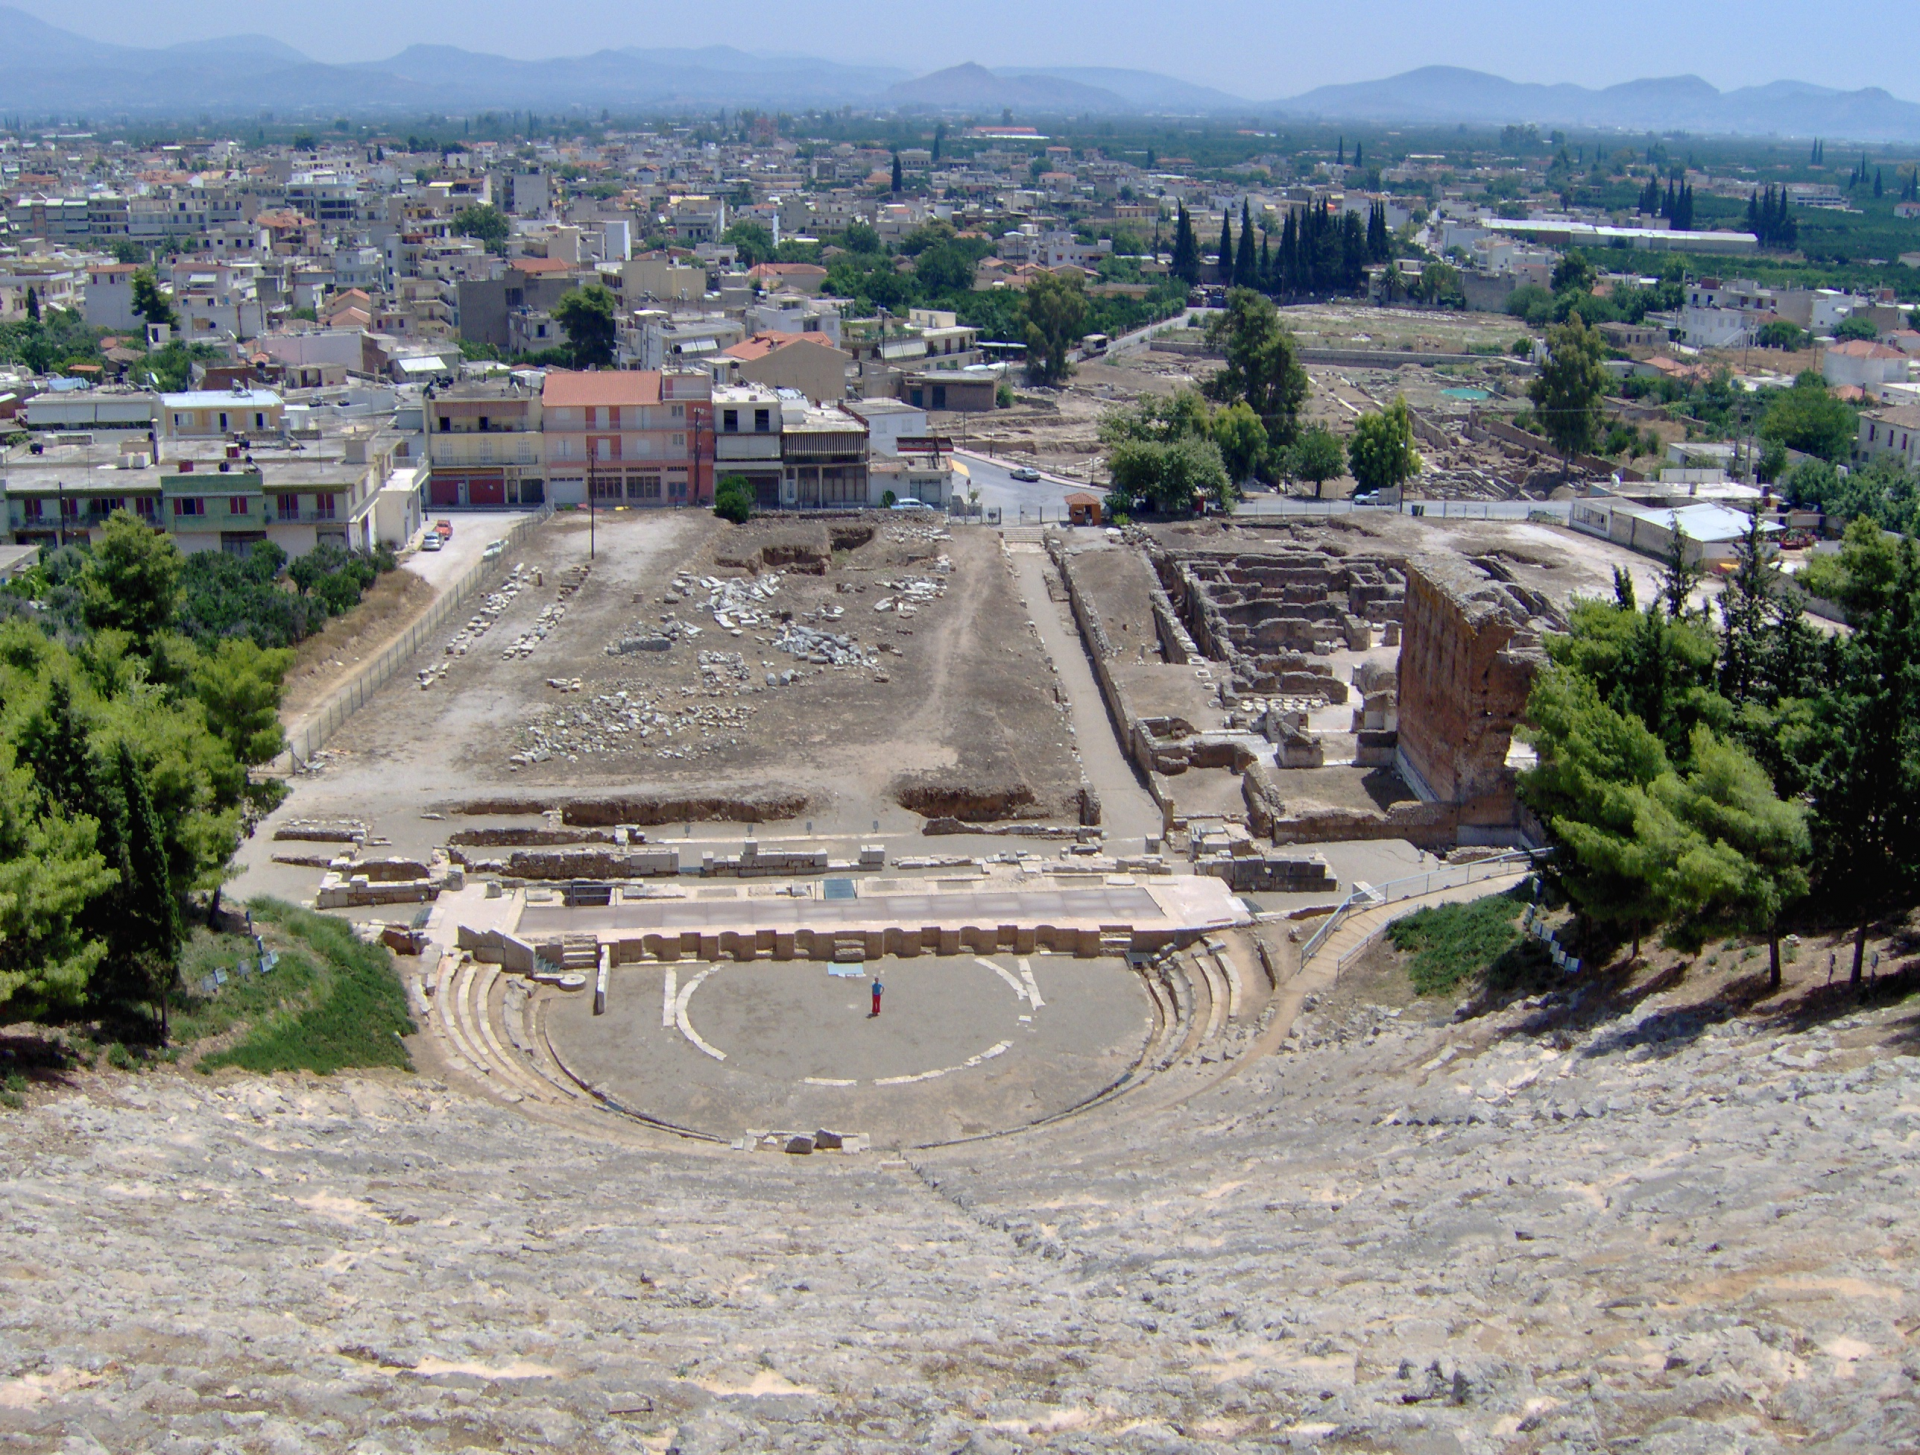 facts about argos the oldest city in europe